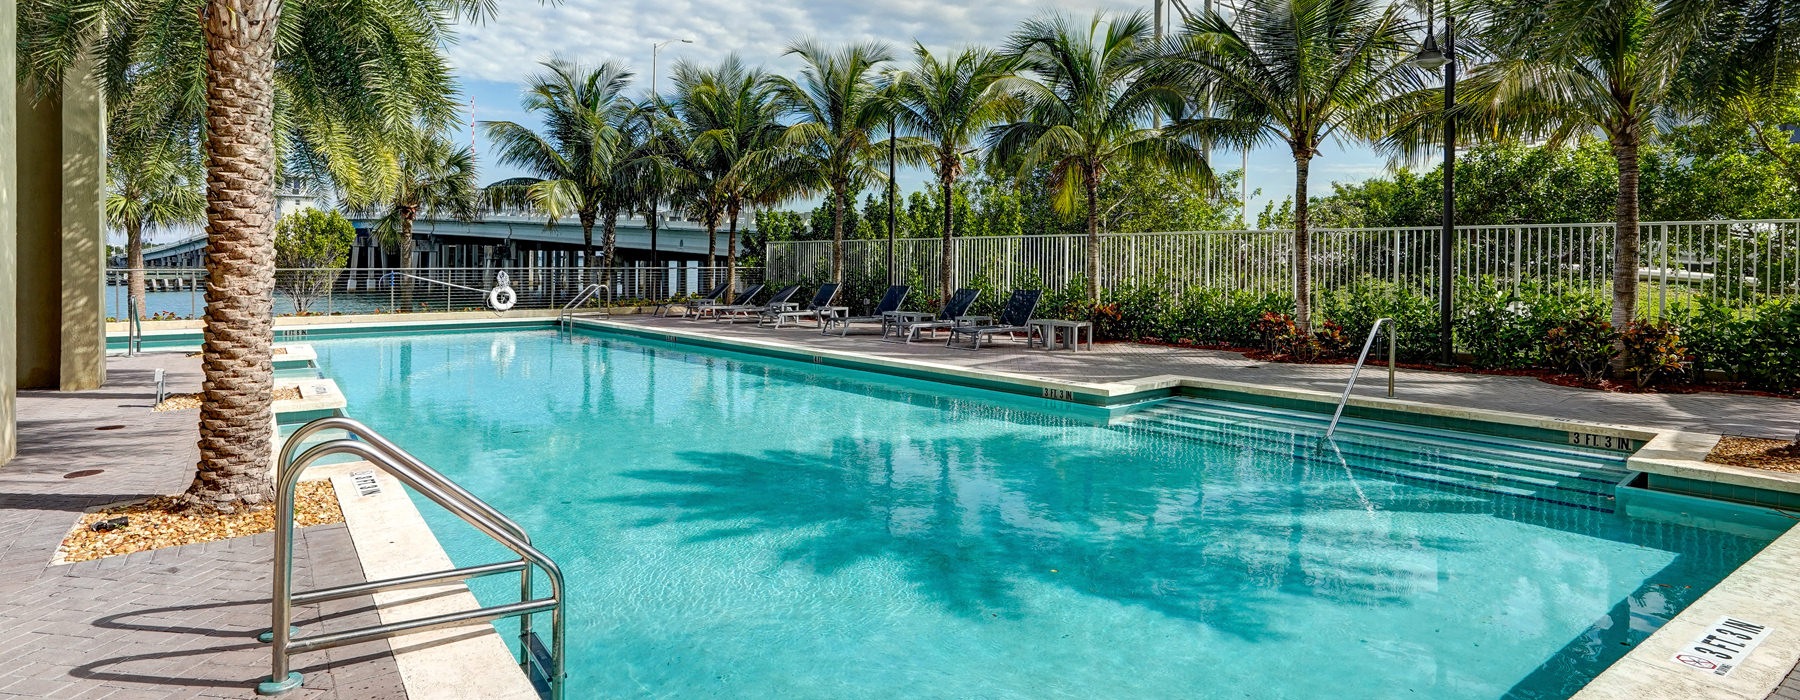 outdoor pool lined by tropical trees and foliage